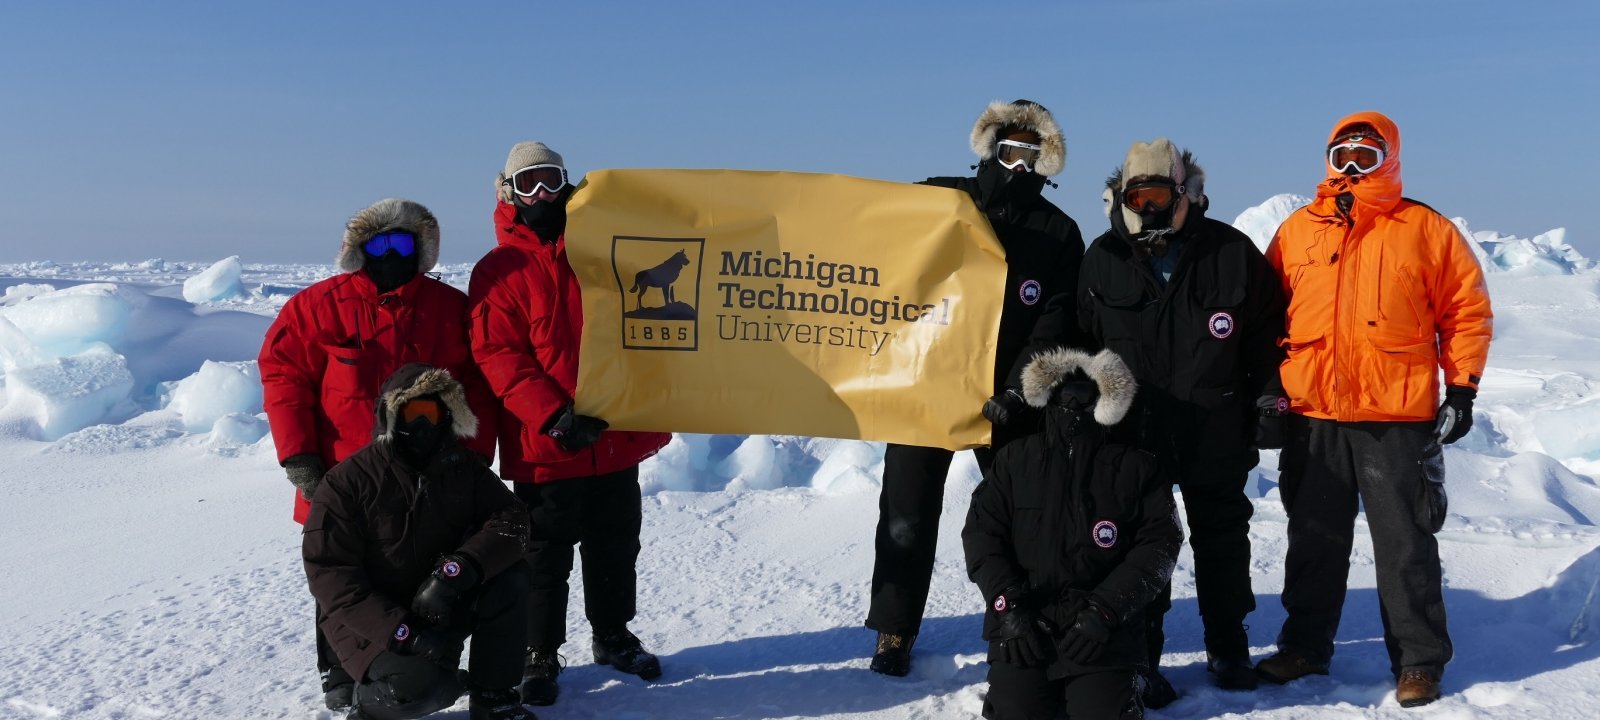 MTRI Scientists working on an arctic sensing project and holding a Michigan Tech banner near Barrow, AK